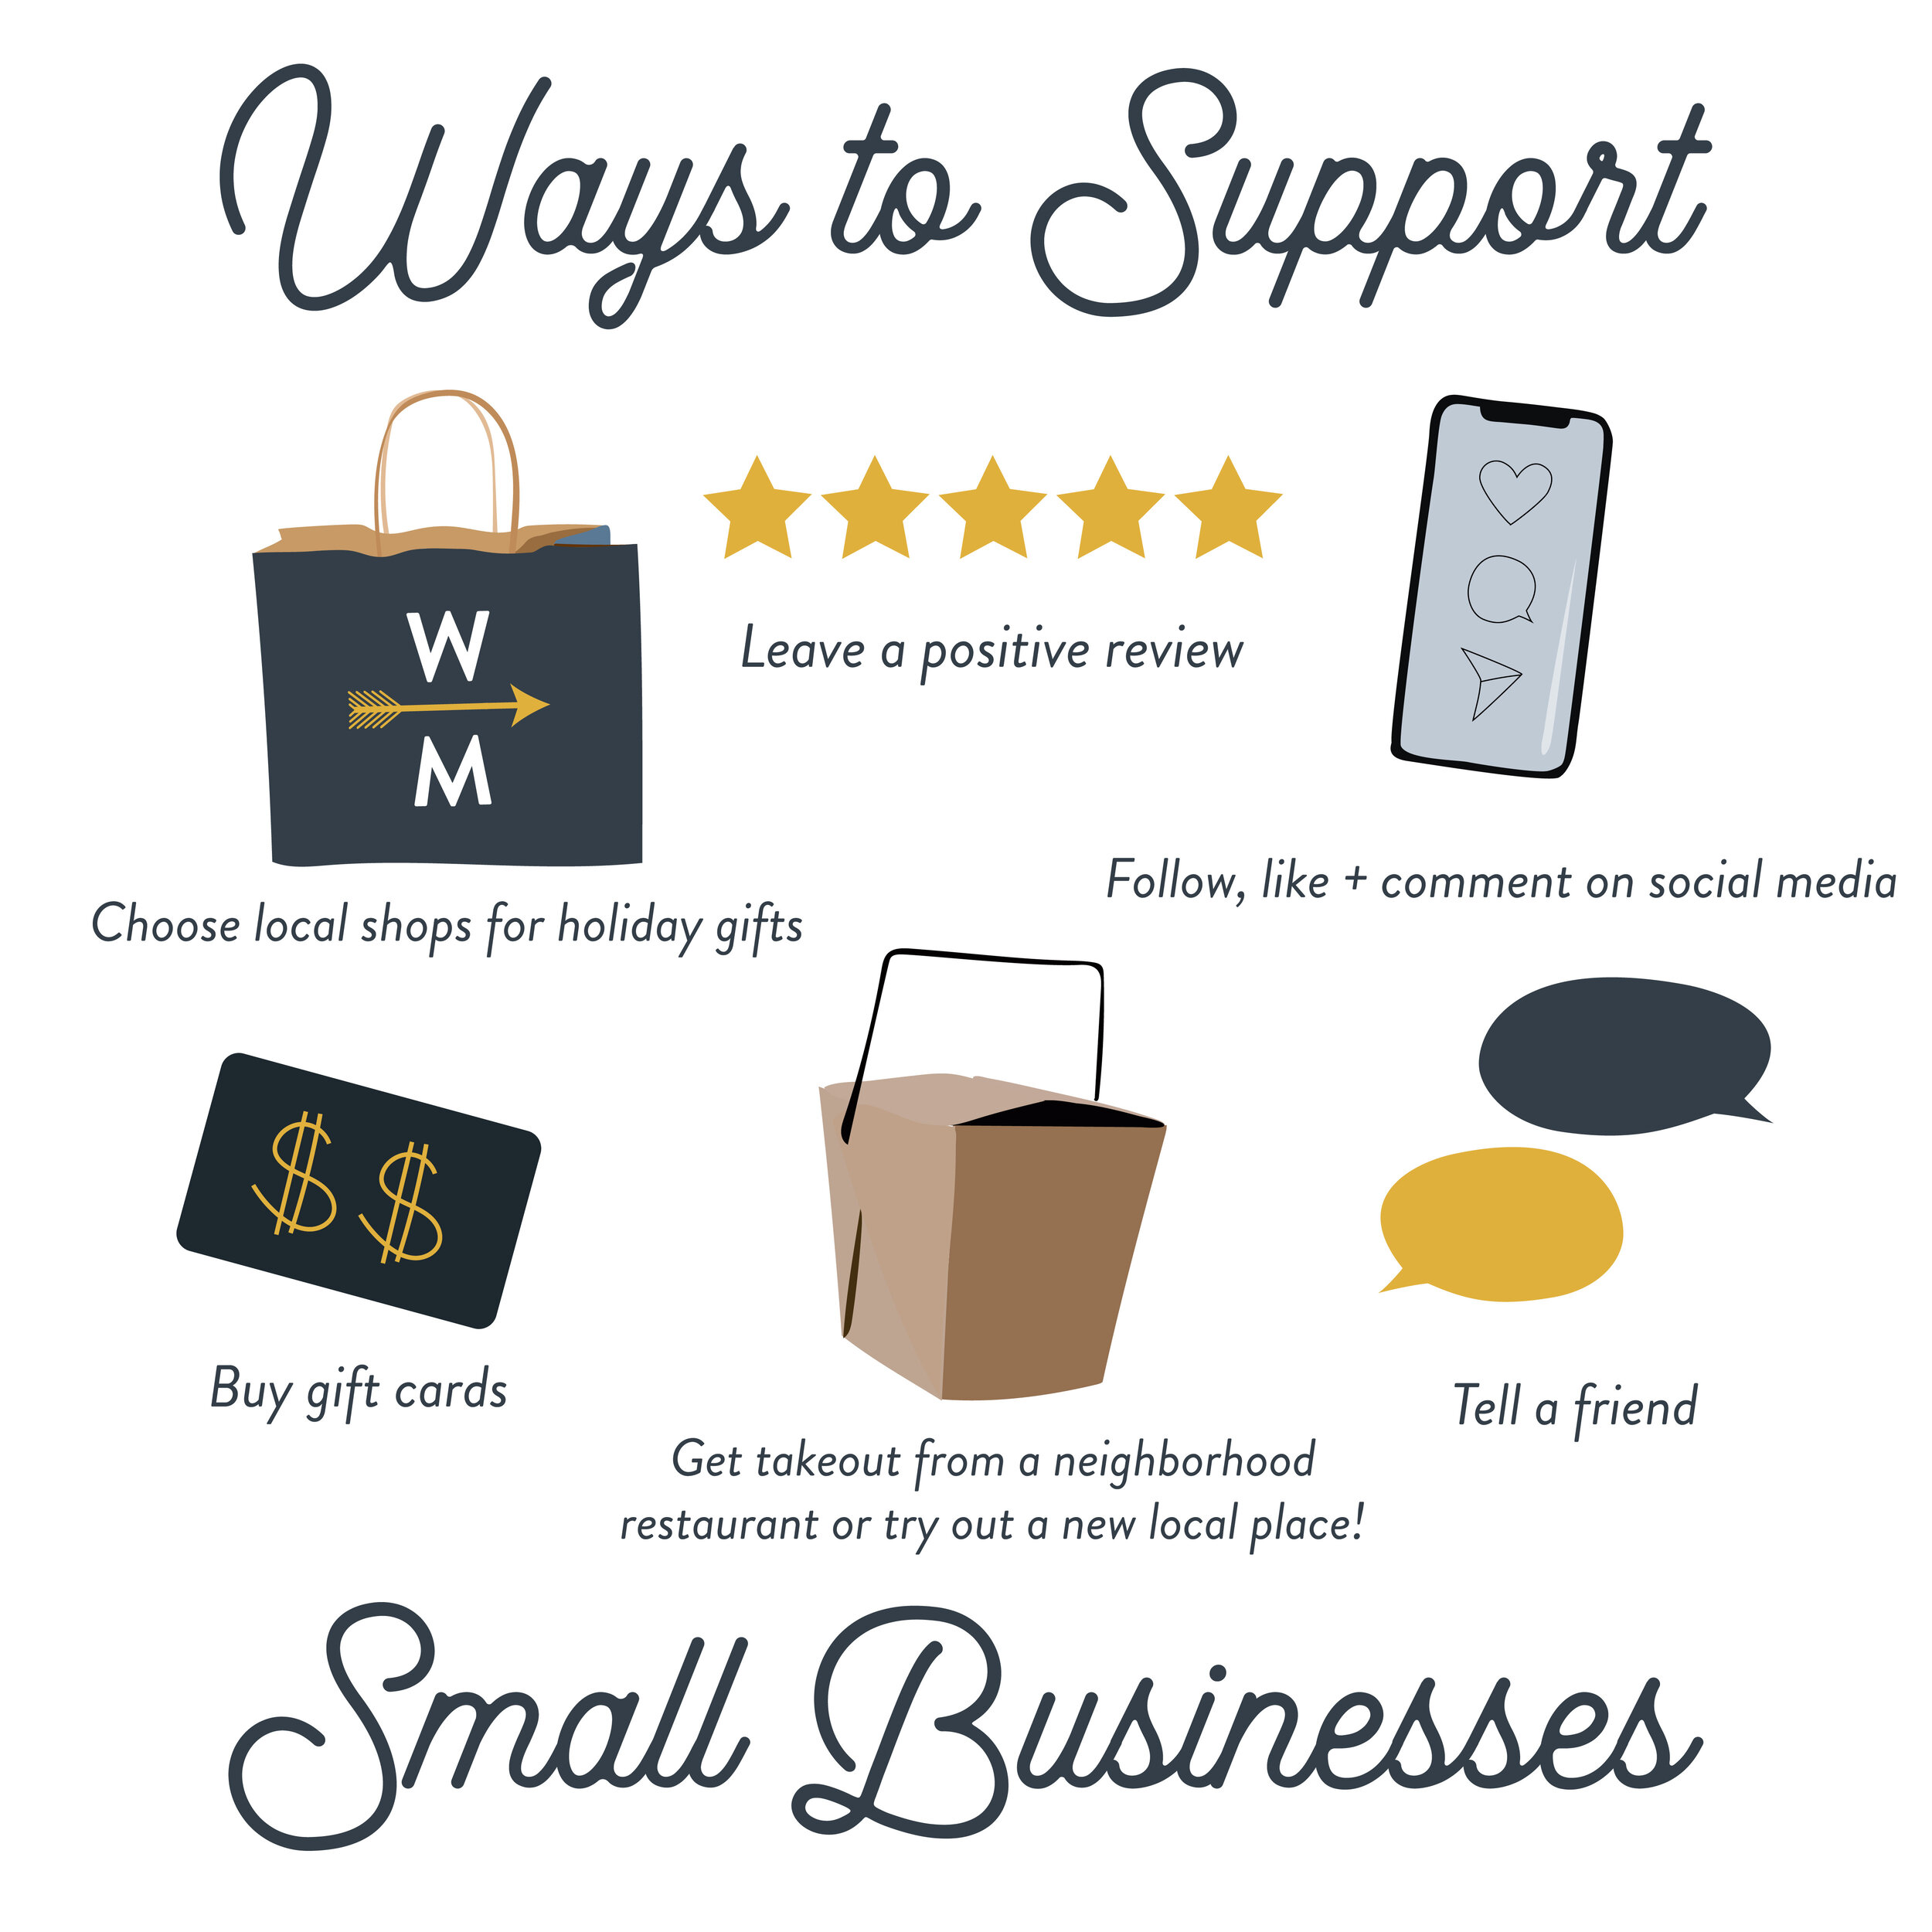 Small Business Campaign-06.jpg